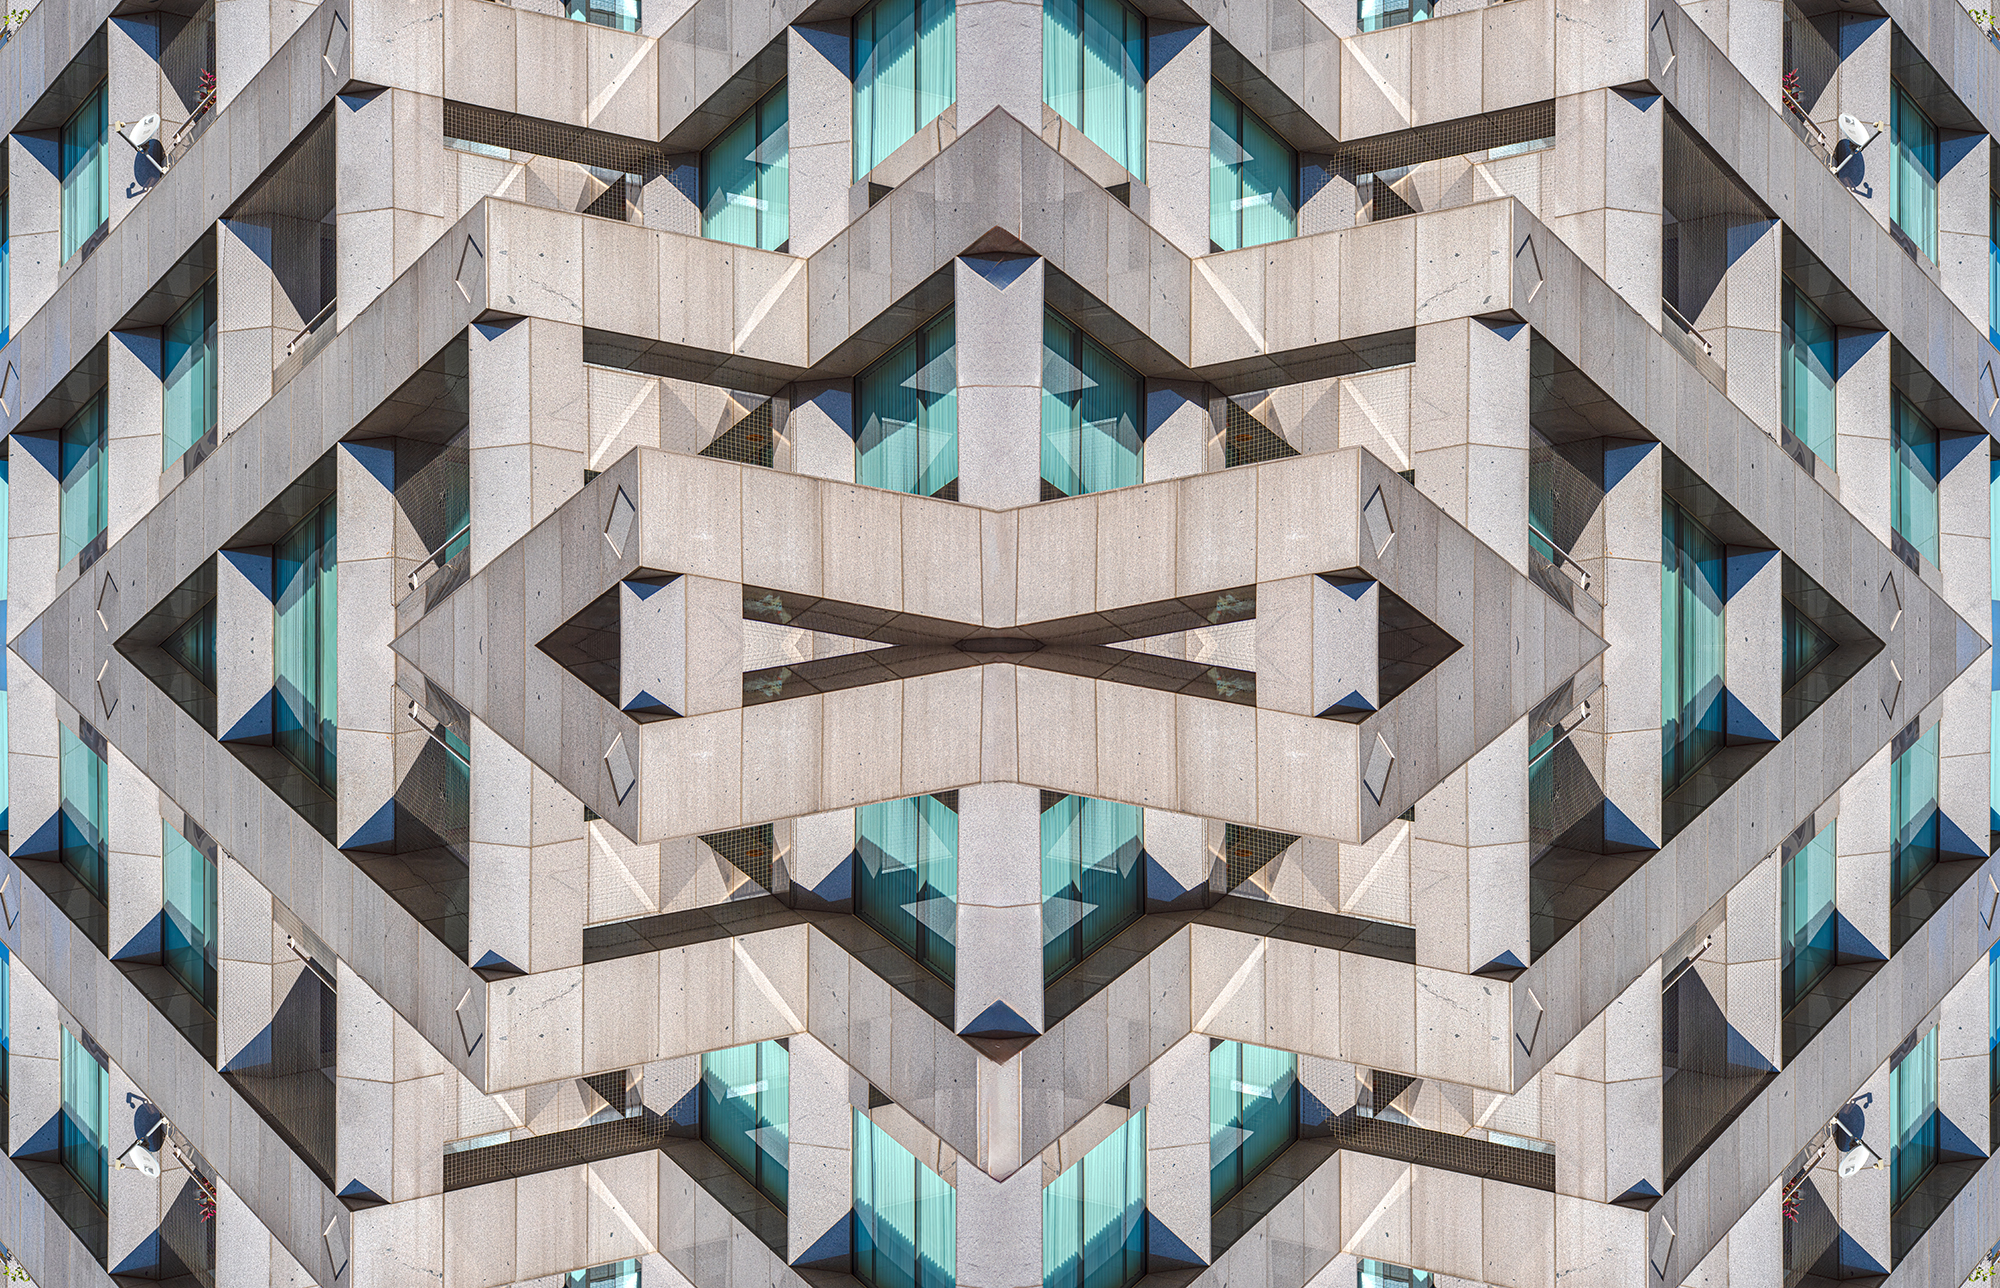  Exploring Harmonies and Symmetries: Unveiling the Beauty of the World Through Photography